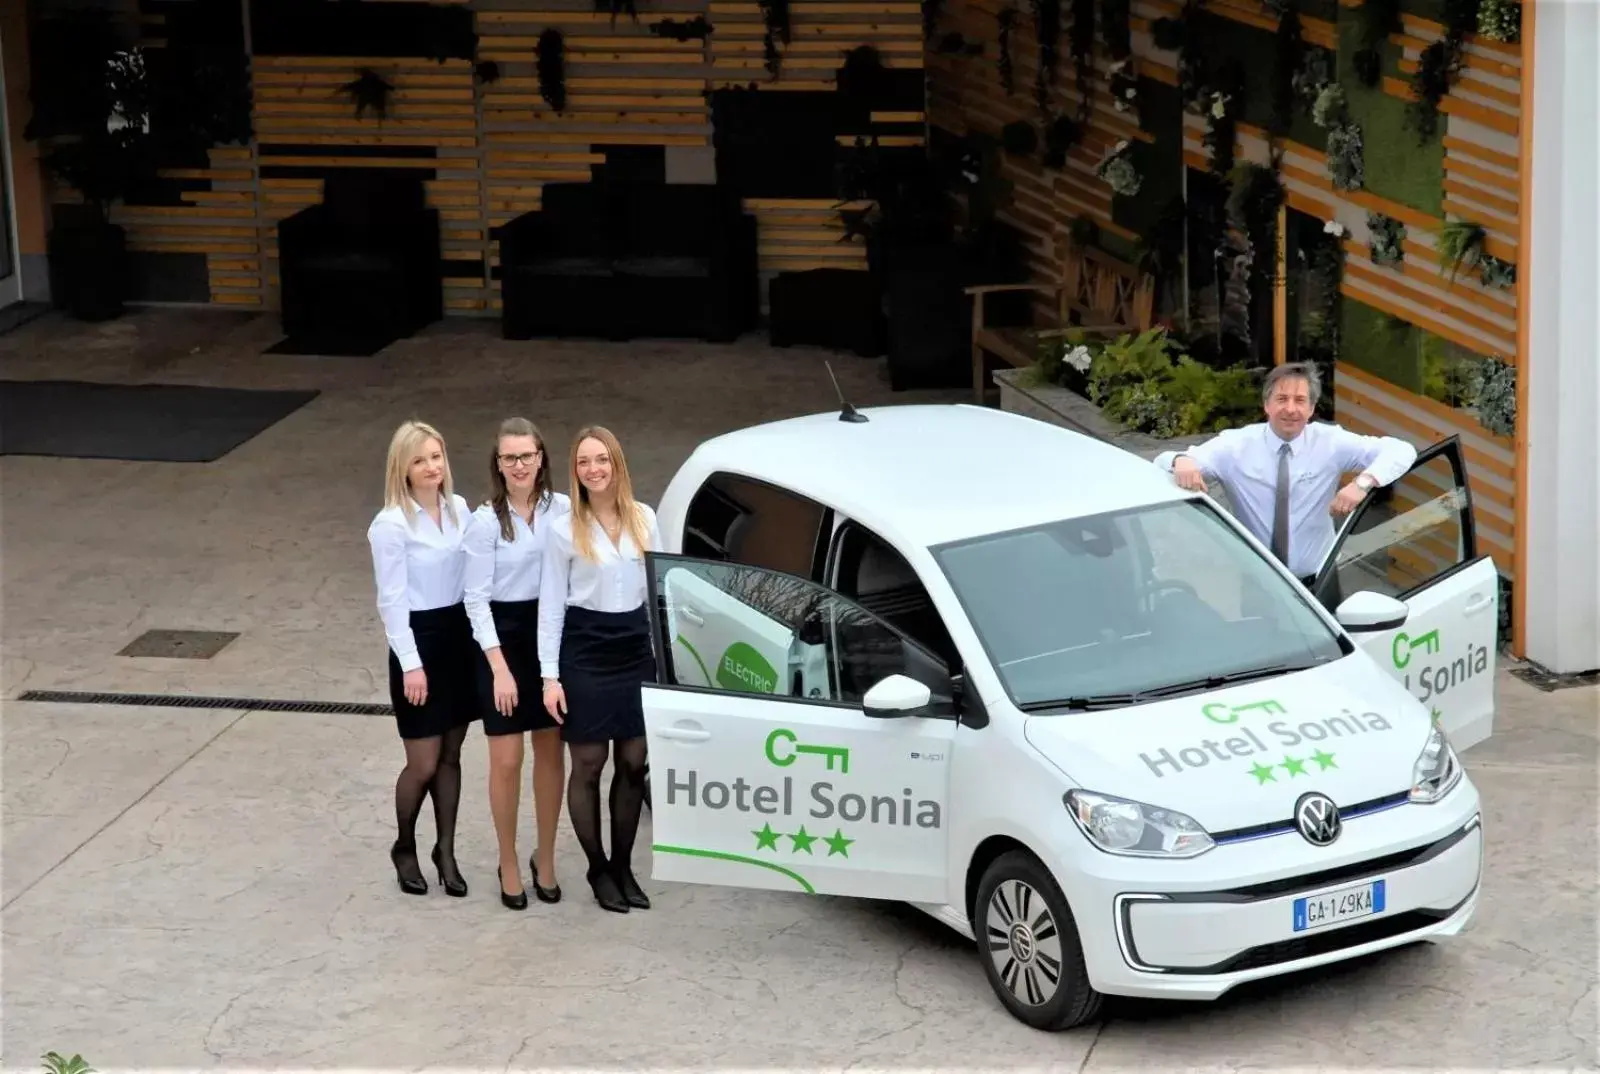 Staff, Guests in Hotel Sonia